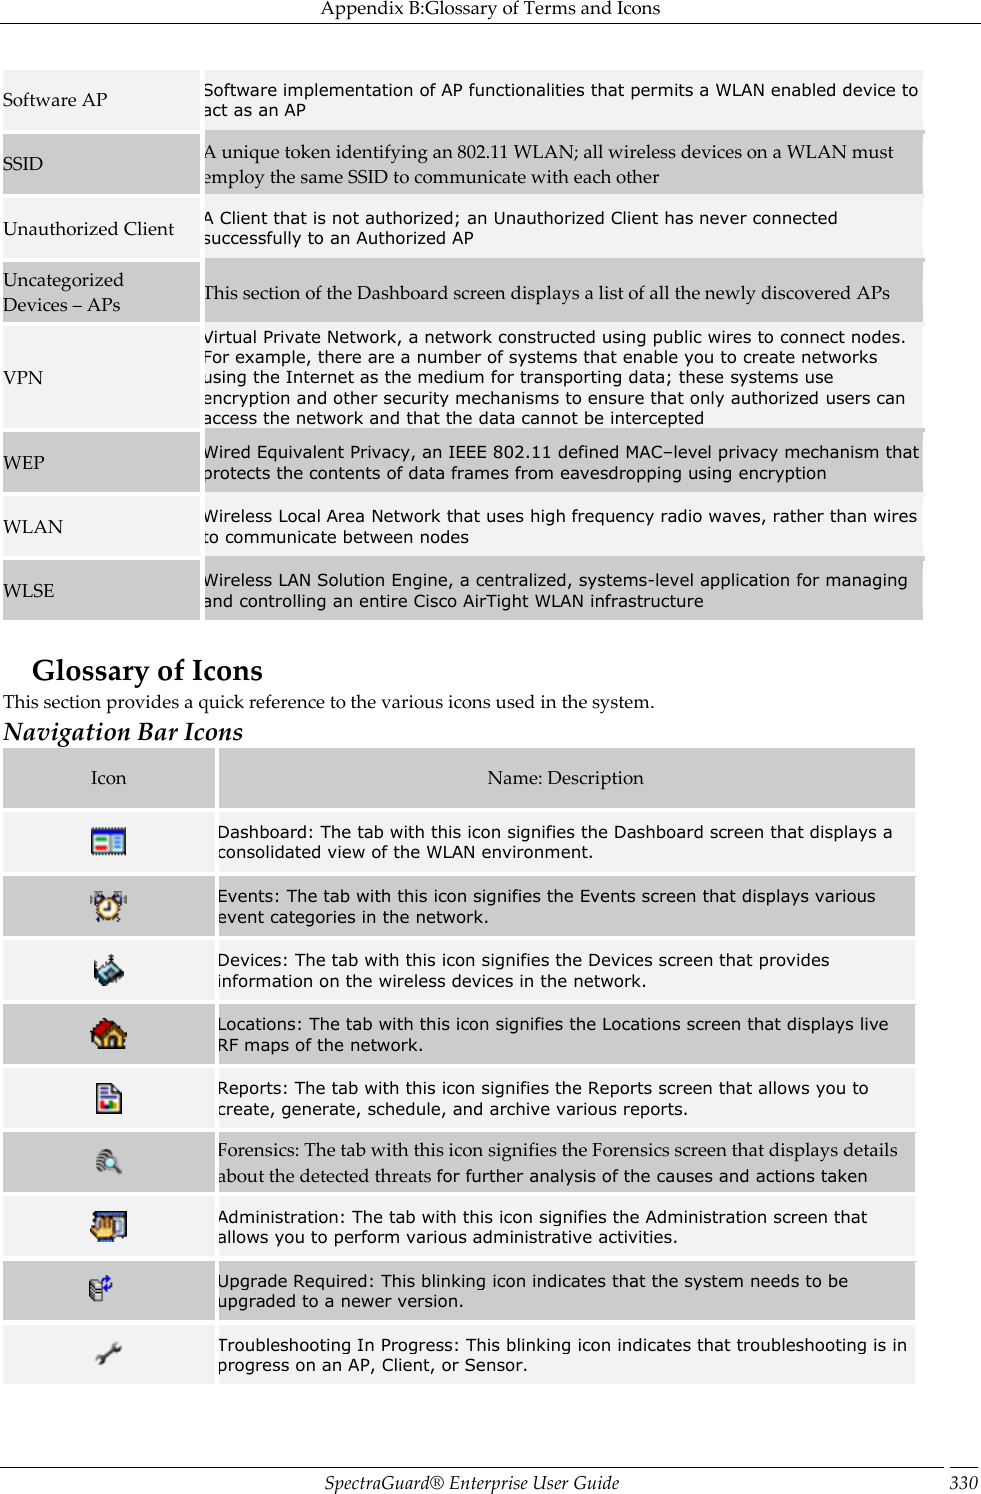 Appendix B:Glossary of Terms and Icons SpectraGuard®  Enterprise User Guide 330 Software AP Software implementation of AP functionalities that permits a WLAN enabled device to act as an AP SSID A unique token identifying an 802.11 WLAN; all wireless devices on a WLAN must employ the same SSID to communicate with each other Unauthorized Client A Client that is not authorized; an Unauthorized Client has never connected successfully to an Authorized AP Uncategorized Devices – APs This section of the Dashboard screen displays a list of all the newly discovered APs VPN Virtual Private Network, a network constructed using public wires to connect nodes. For example, there are a number of systems that enable you to create networks using the Internet as the medium for transporting data; these systems use encryption and other security mechanisms to ensure that only authorized users can access the network and that the data cannot be intercepted WEP Wired Equivalent Privacy, an IEEE 802.11 defined MAC–level privacy mechanism that protects the contents of data frames from eavesdropping using encryption WLAN Wireless Local Area Network that uses high frequency radio waves, rather than wires to communicate between nodes WLSE Wireless LAN Solution Engine, a centralized, systems-level application for managing and controlling an entire Cisco AirTight WLAN infrastructure   Glossary of Icons This section provides a quick reference to the various icons used in the system. Navigation Bar Icons Icon Name: Description  Dashboard: The tab with this icon signifies the Dashboard screen that displays a consolidated view of the WLAN environment.  Events: The tab with this icon signifies the Events screen that displays various event categories in the network.  Devices: The tab with this icon signifies the Devices screen that provides information on the wireless devices in the network.  Locations: The tab with this icon signifies the Locations screen that displays live RF maps of the network.  Reports: The tab with this icon signifies the Reports screen that allows you to create, generate, schedule, and archive various reports.  Forensics: The tab with this icon signifies the Forensics screen that displays details about the detected threats for further analysis of the causes and actions taken  Administration: The tab with this icon signifies the Administration screen that allows you to perform various administrative activities.  Upgrade Required: This blinking icon indicates that the system needs to be upgraded to a newer version.  Troubleshooting In Progress: This blinking icon indicates that troubleshooting is in progress on an AP, Client, or Sensor. 